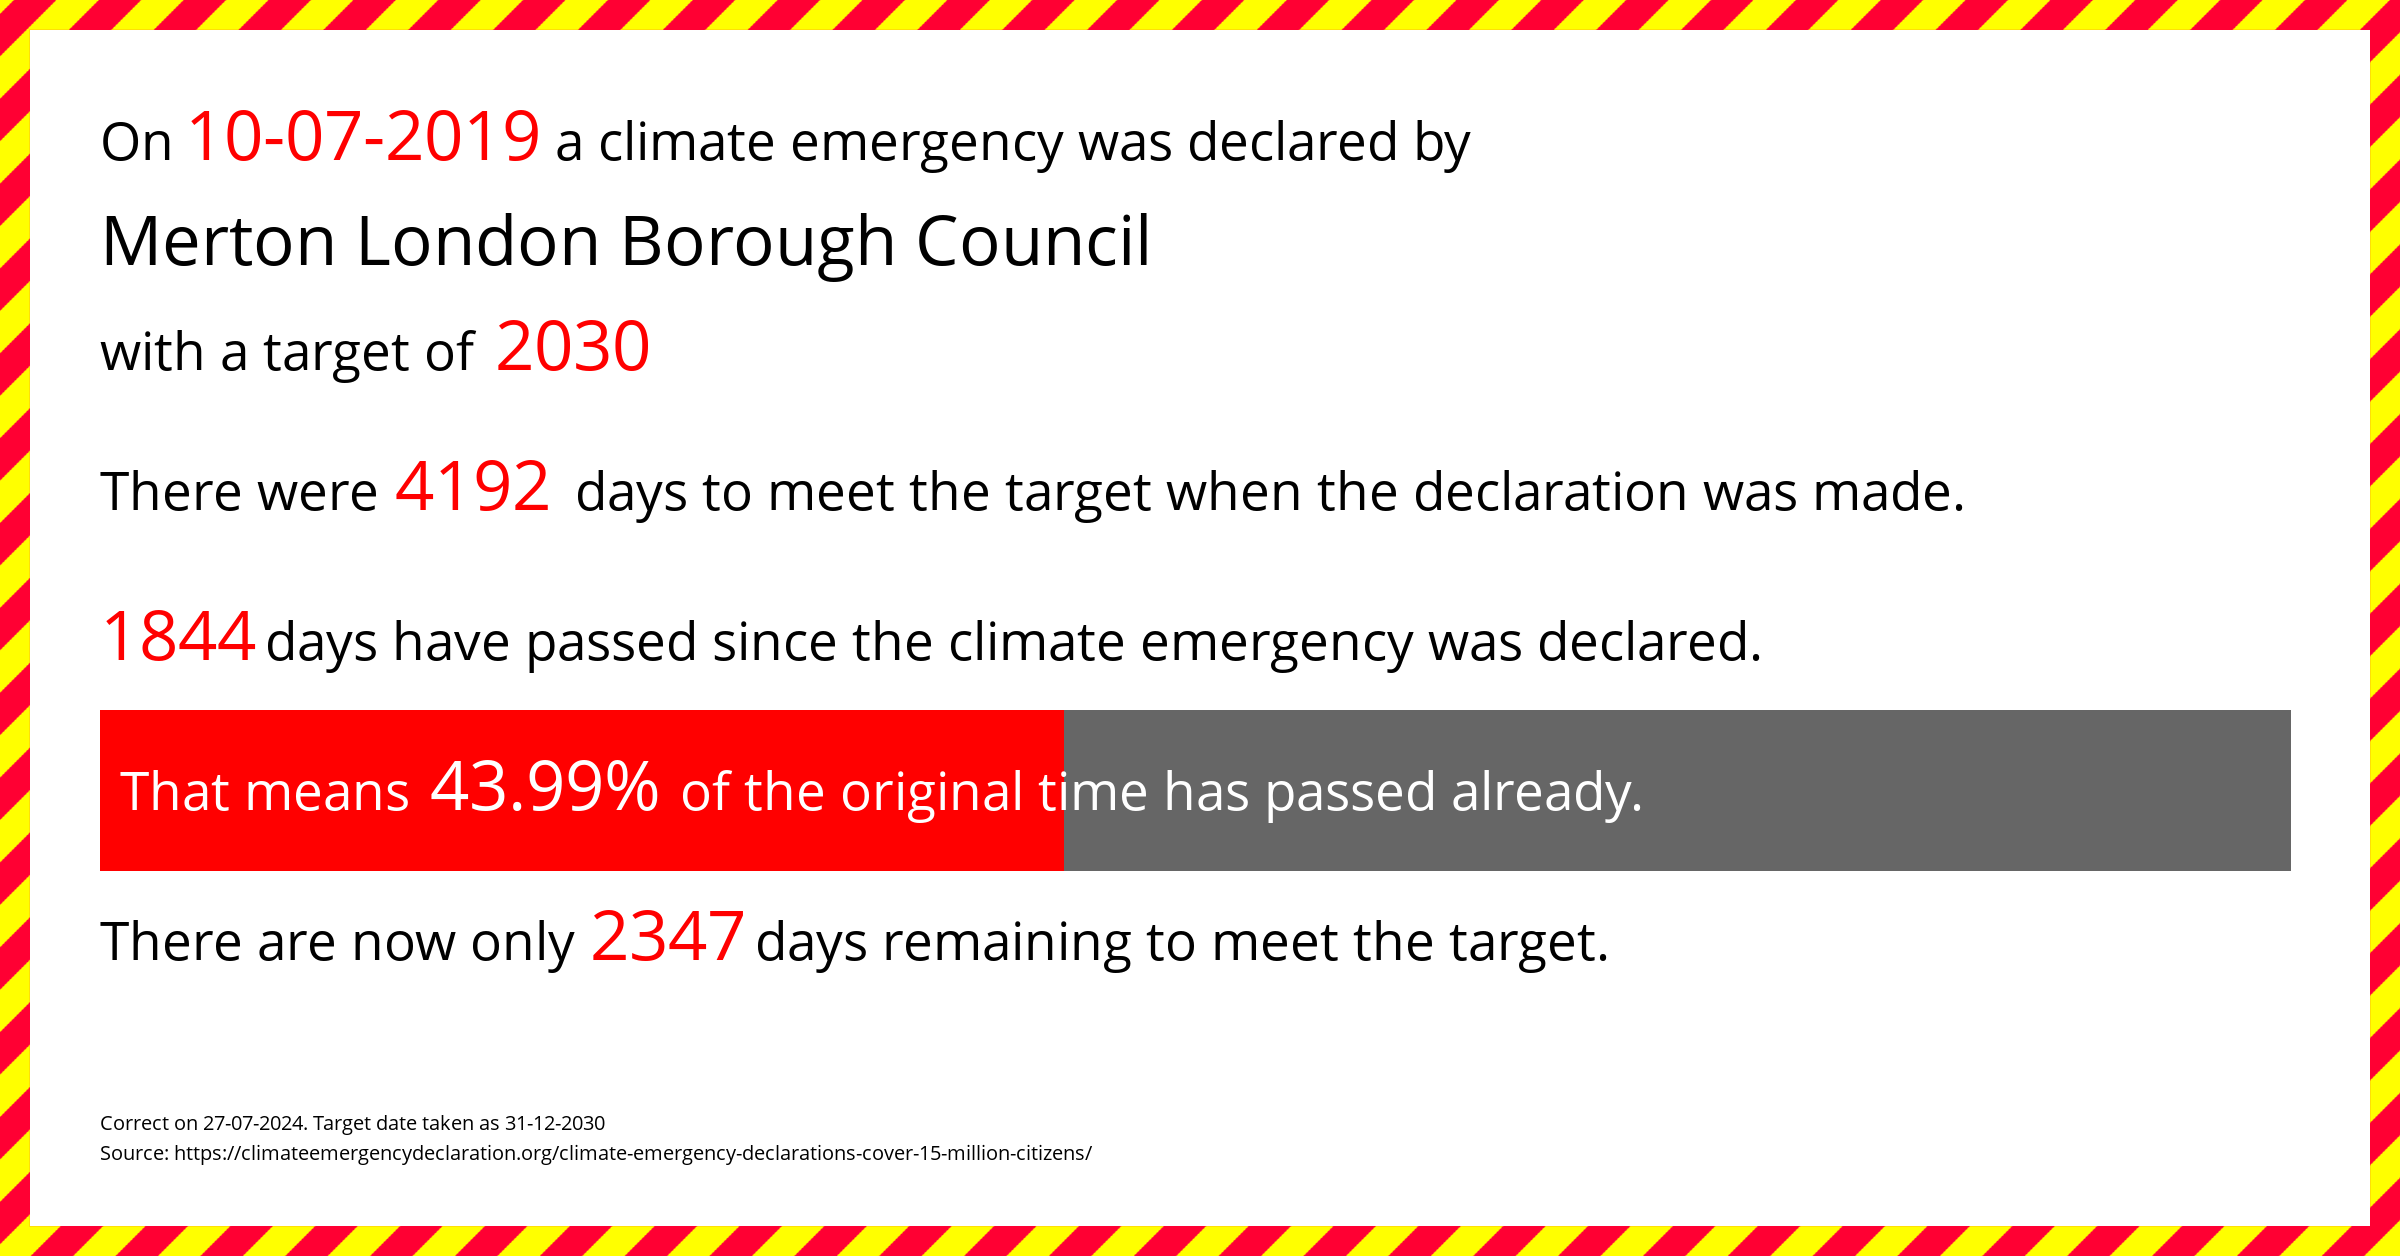 Merton London Borough Council declared a Climate emergency on Wednesday 10th July 2019, with a target of 2030.